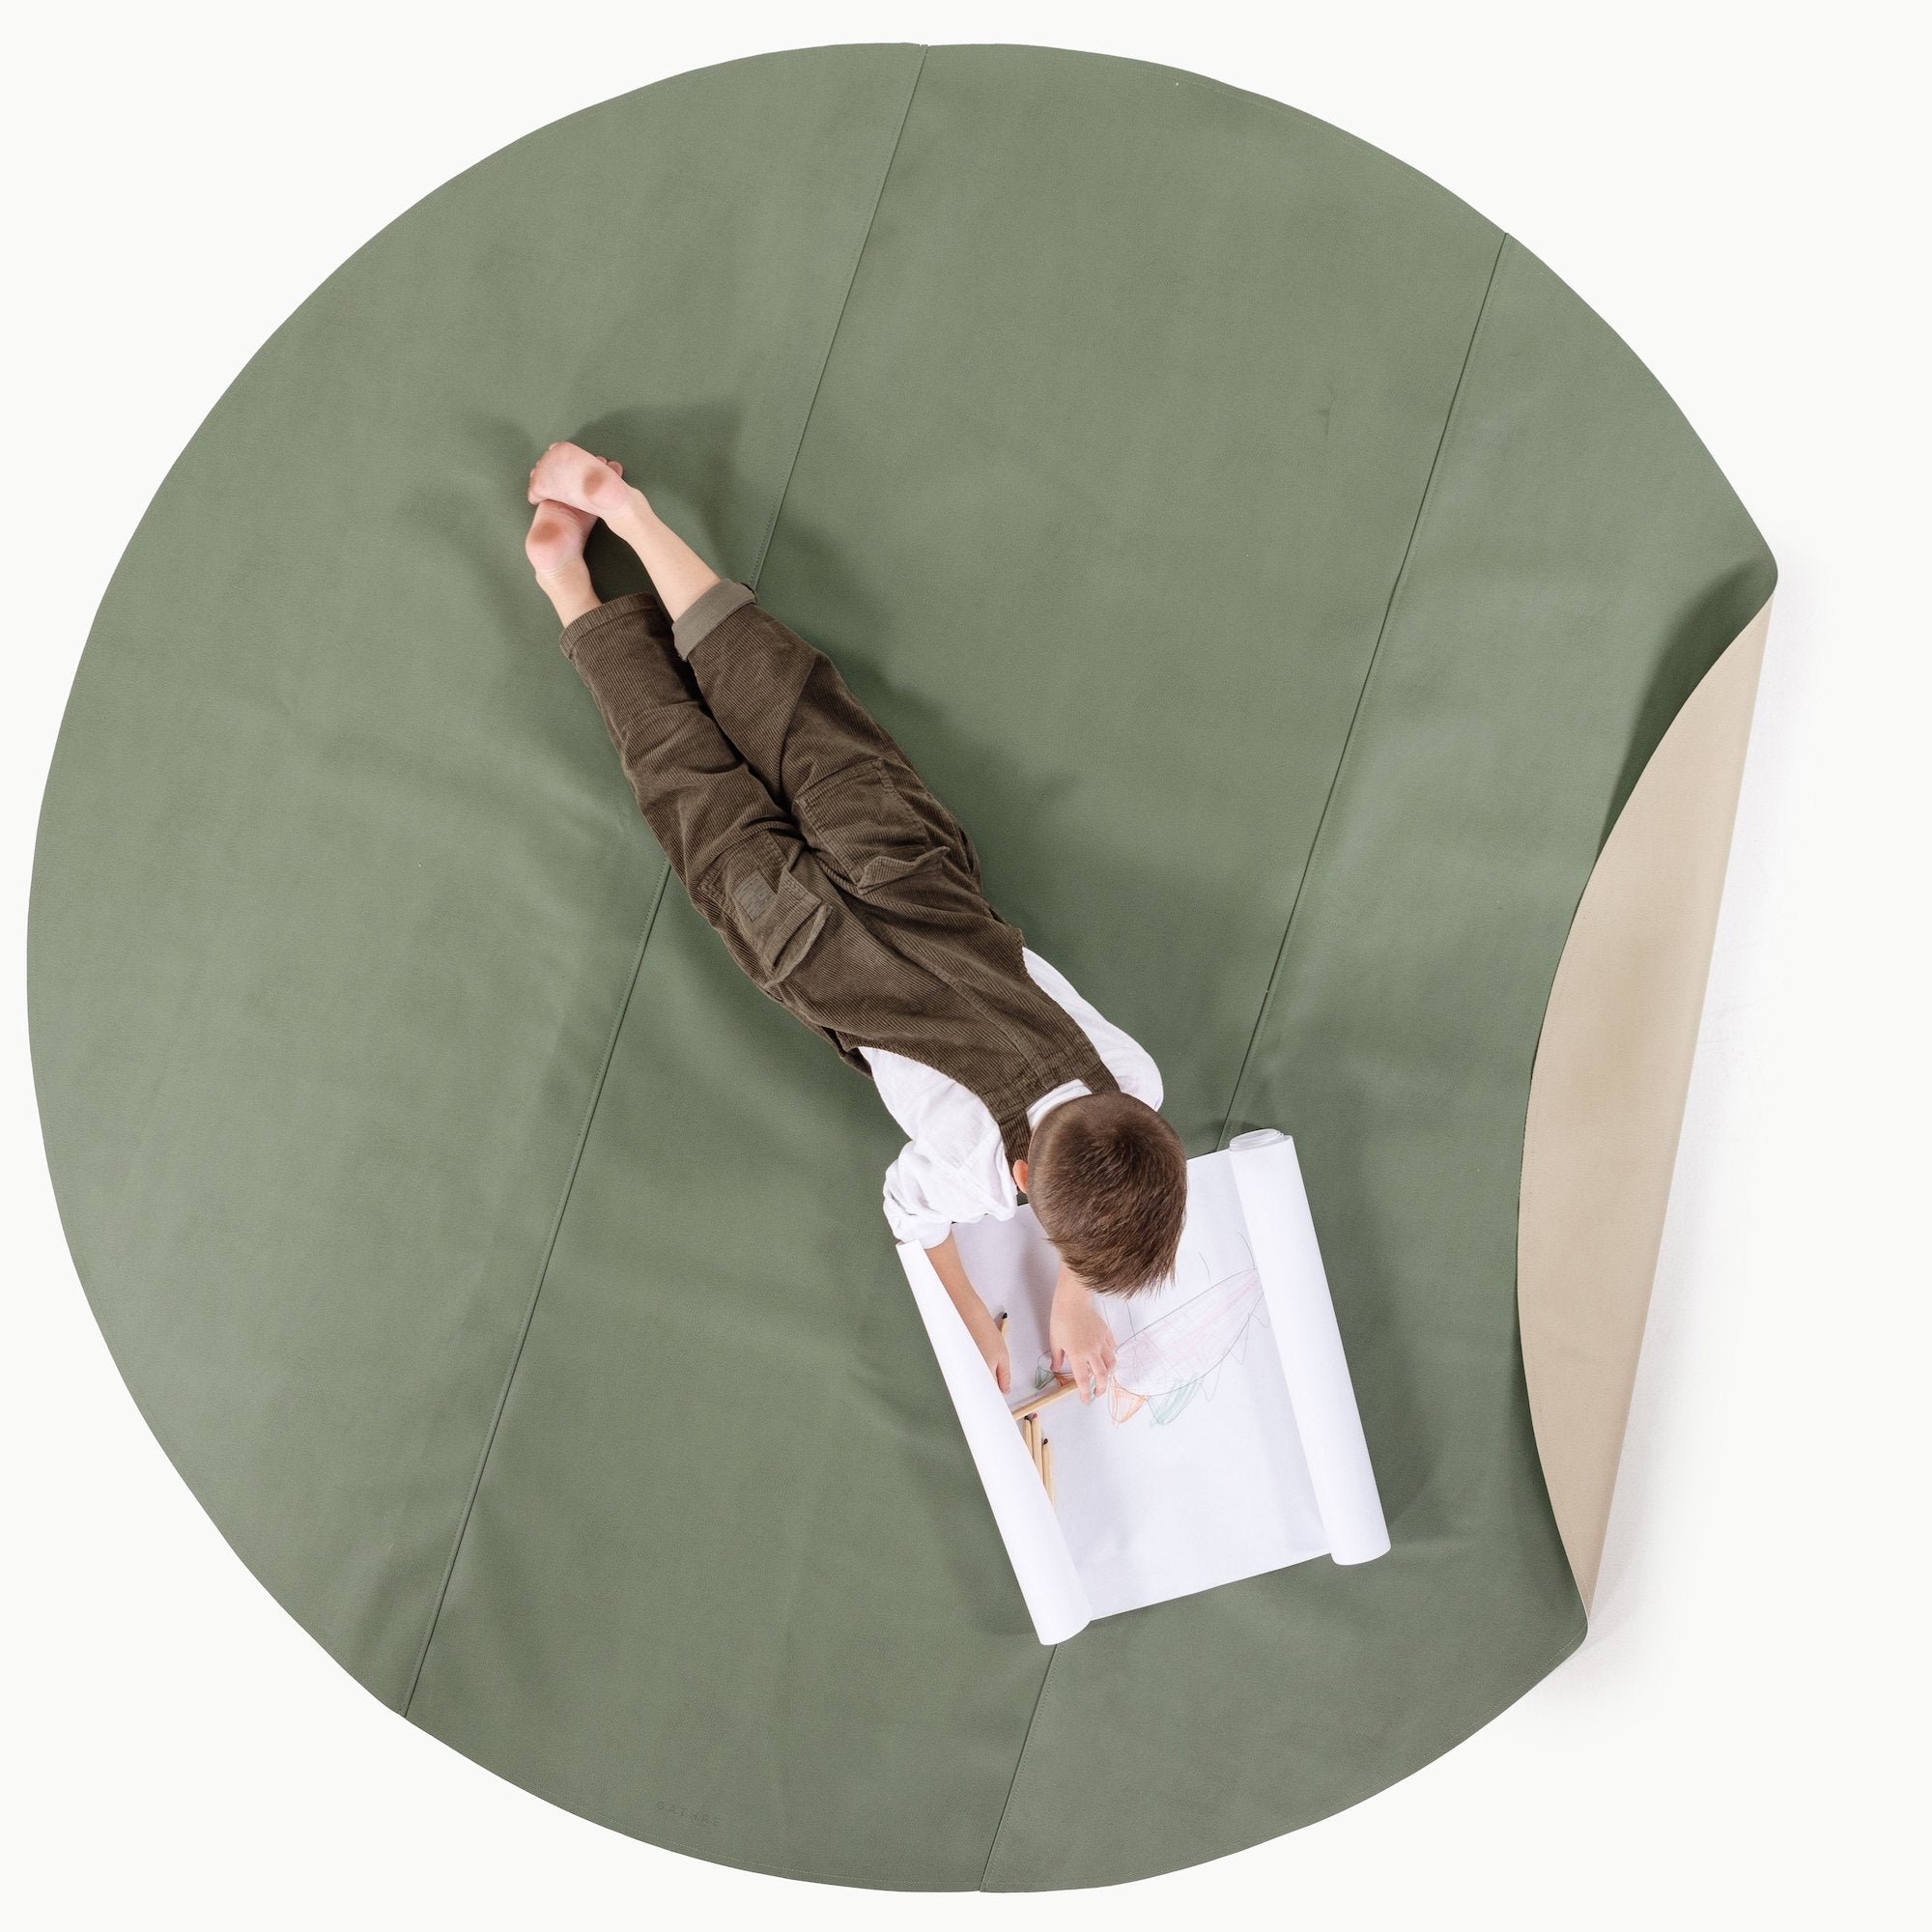 Thyme • Fog / Circle@Overhead of kid playing on the Thyme/Fog Maxi Circle Mat